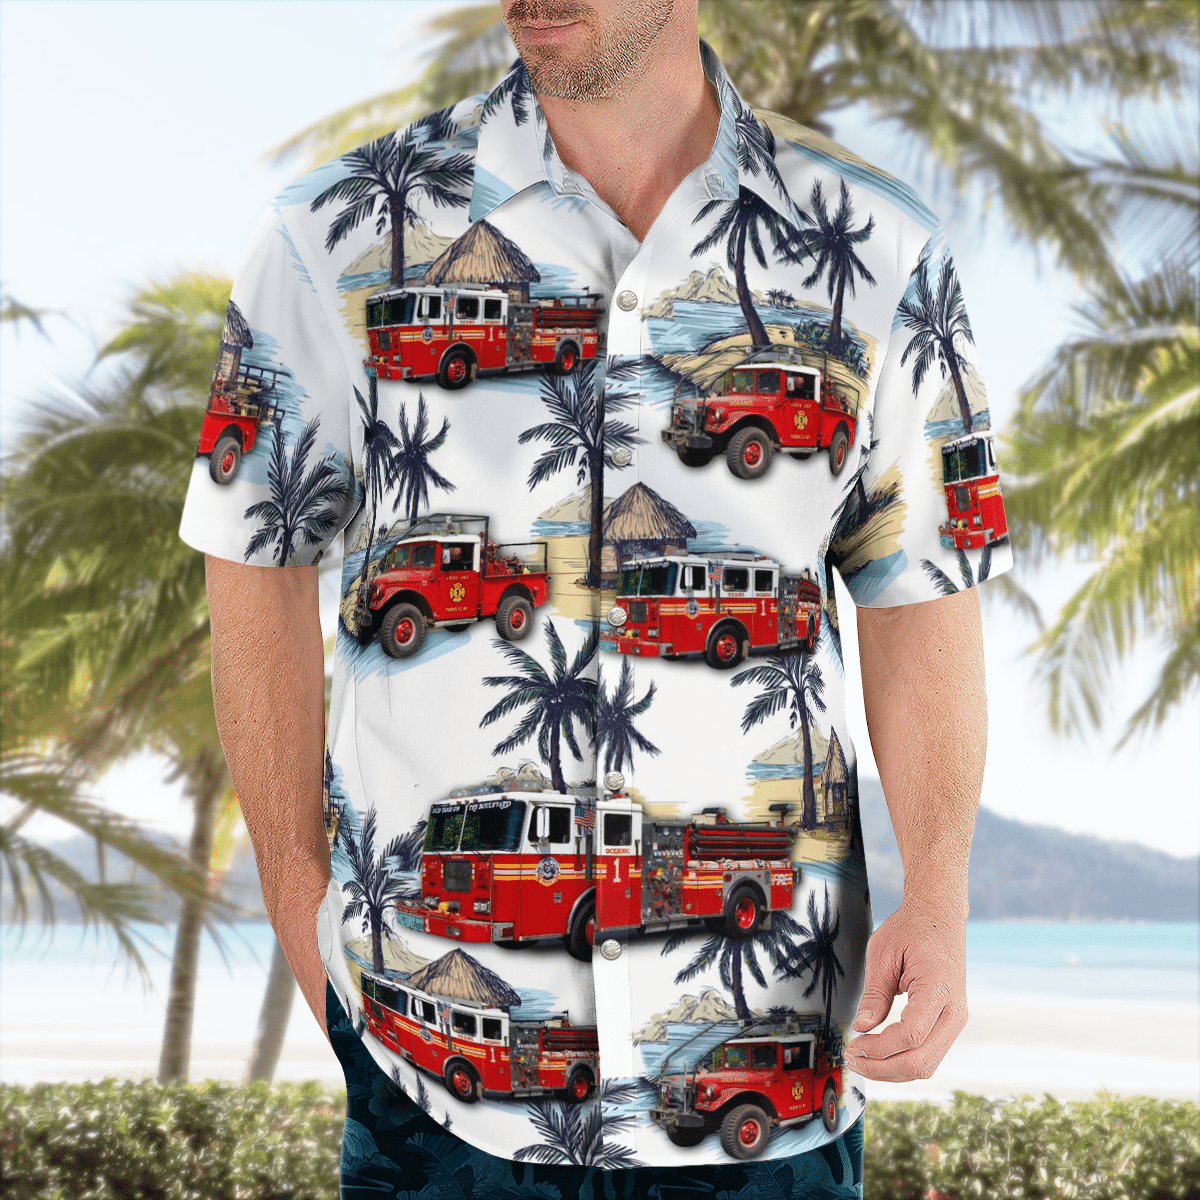 There are several styles of beach and Hawaiian shorts and tops to choose from 203